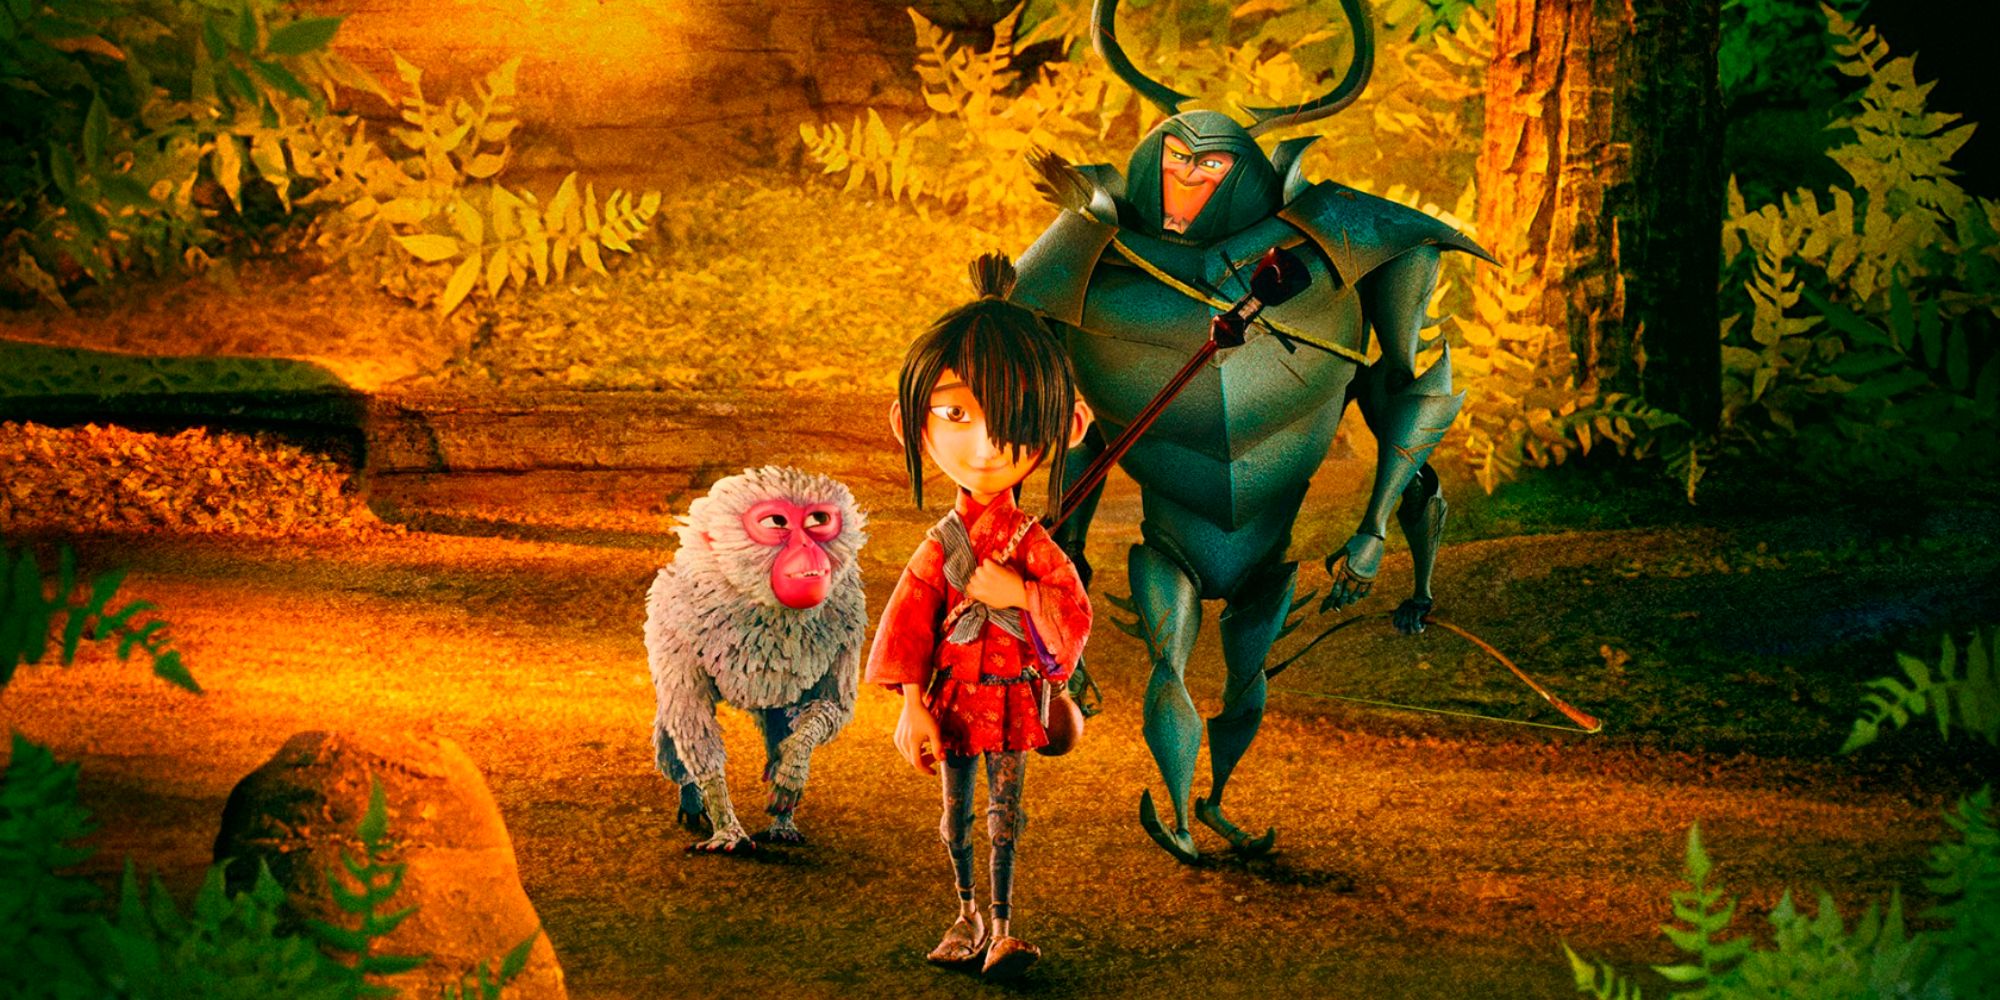 Characters from Kubo and the Two Strings